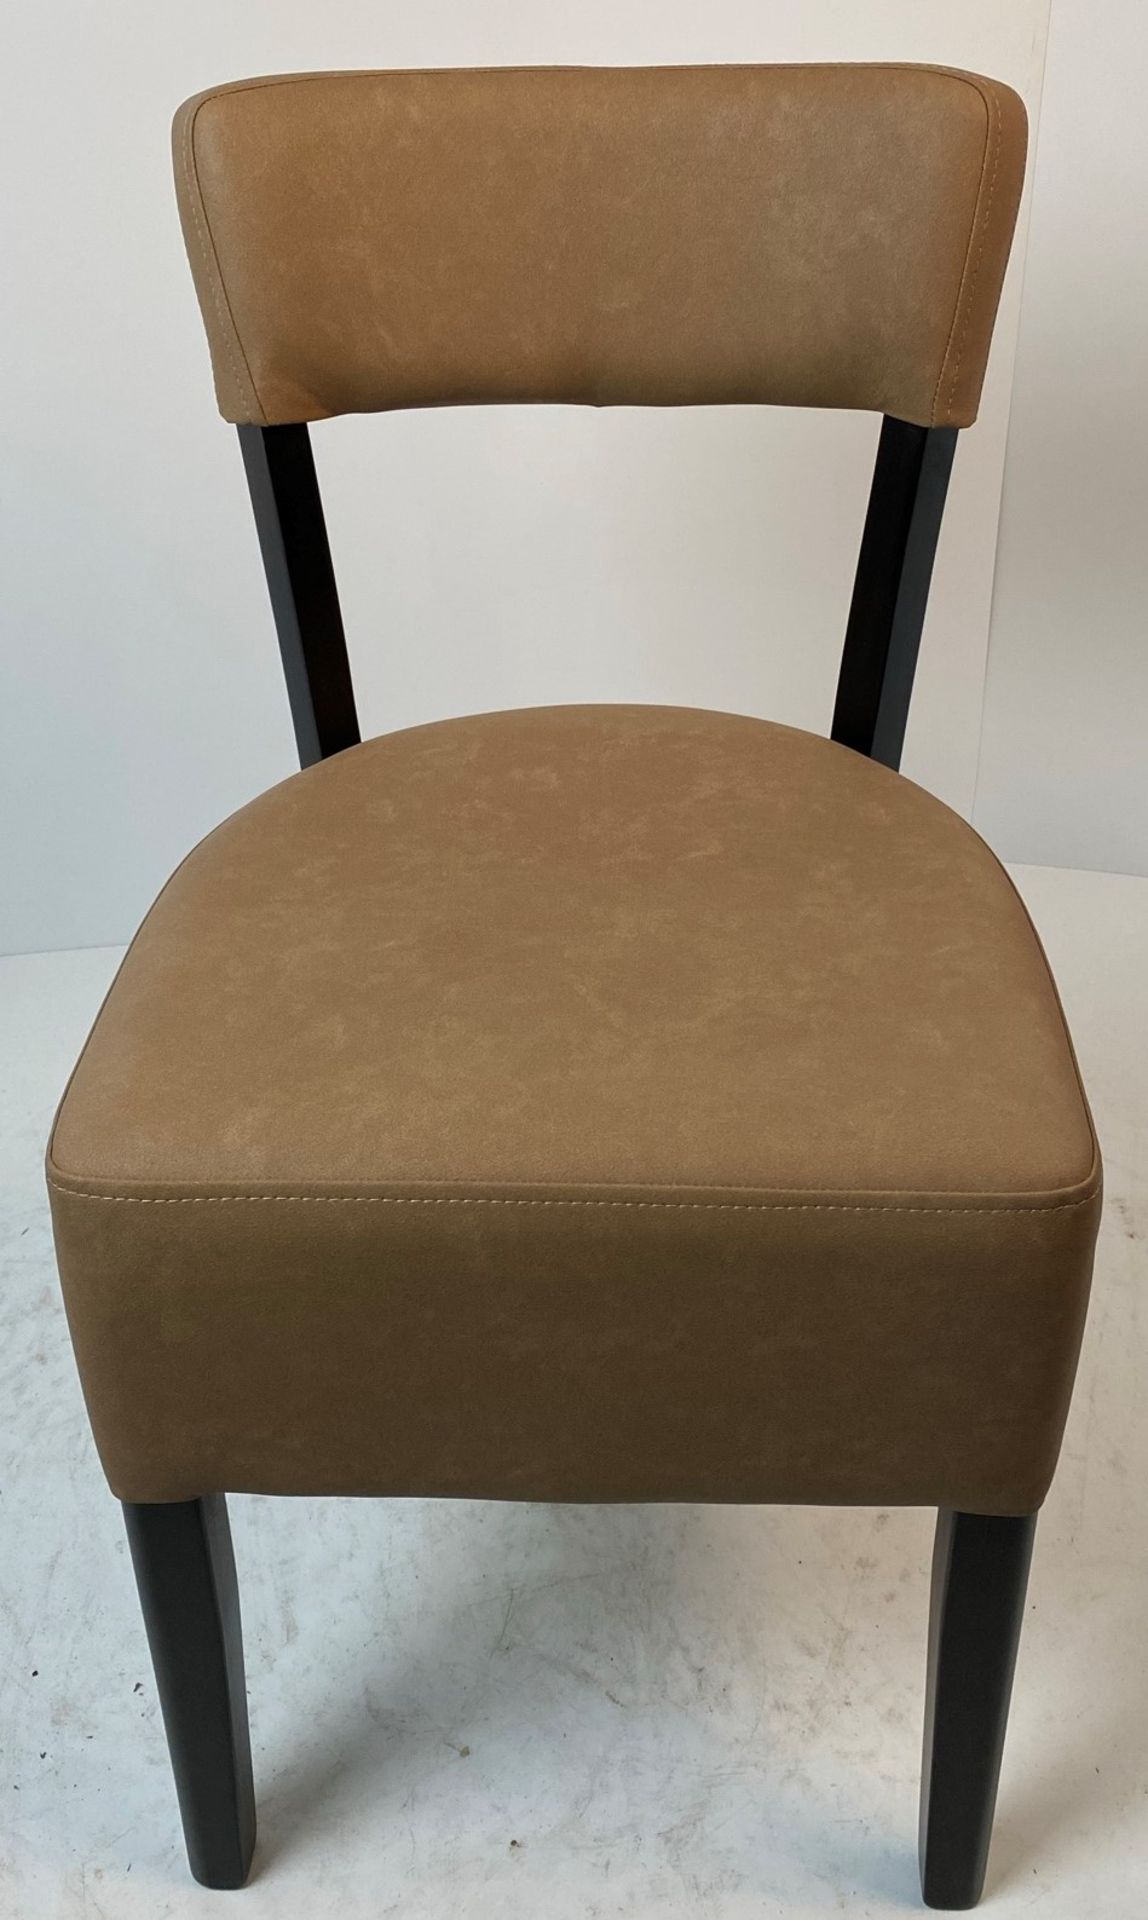 A Memphis Half Back Covertex Infiniti Caramel INF1847 side/dining chair with Wenge coloured frame